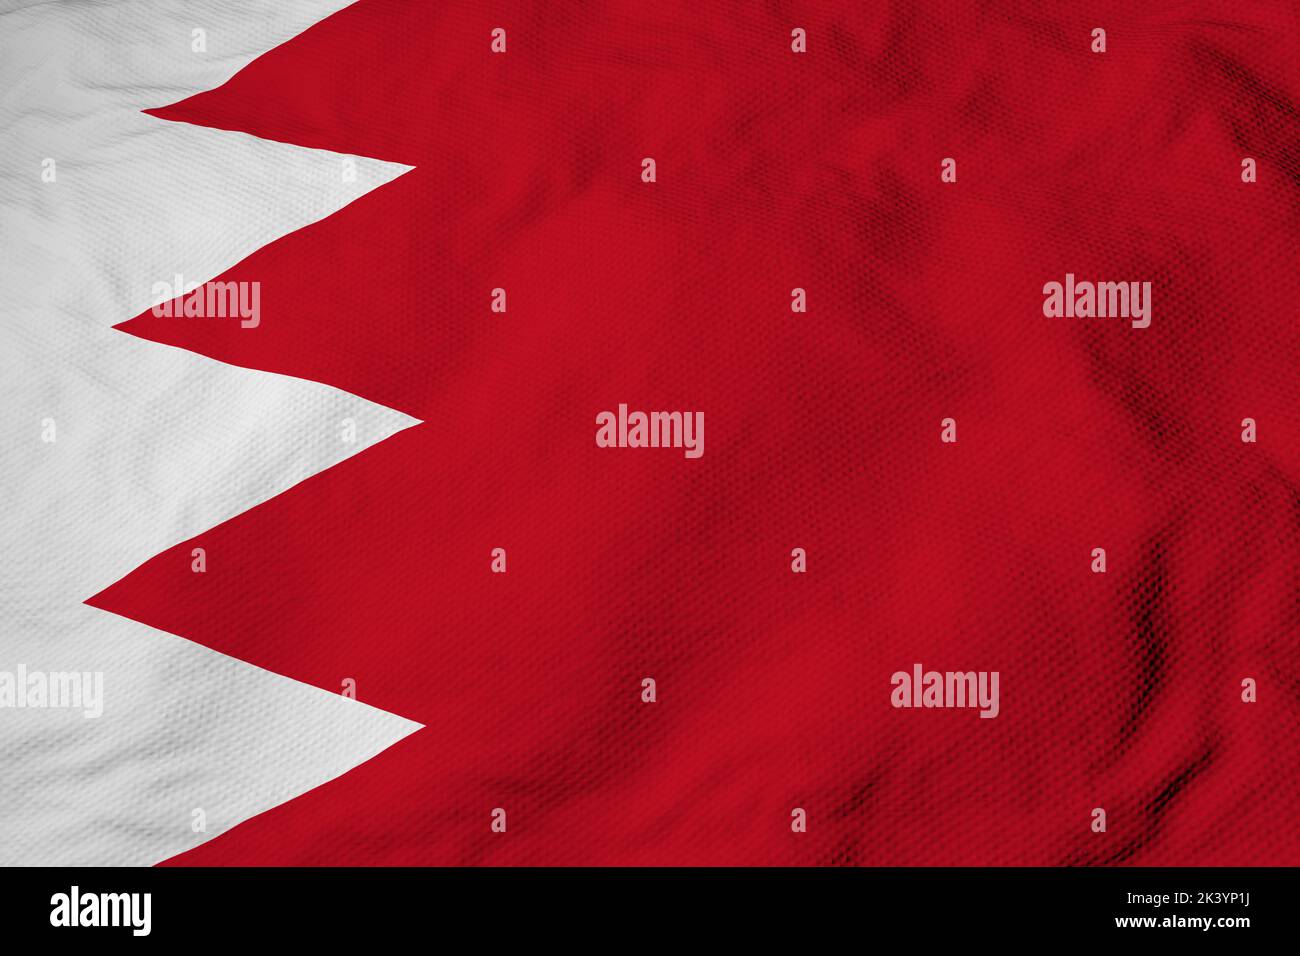 Full frame close-up on a waving Flag of Bahrain in 3D rendering. Stock Photo